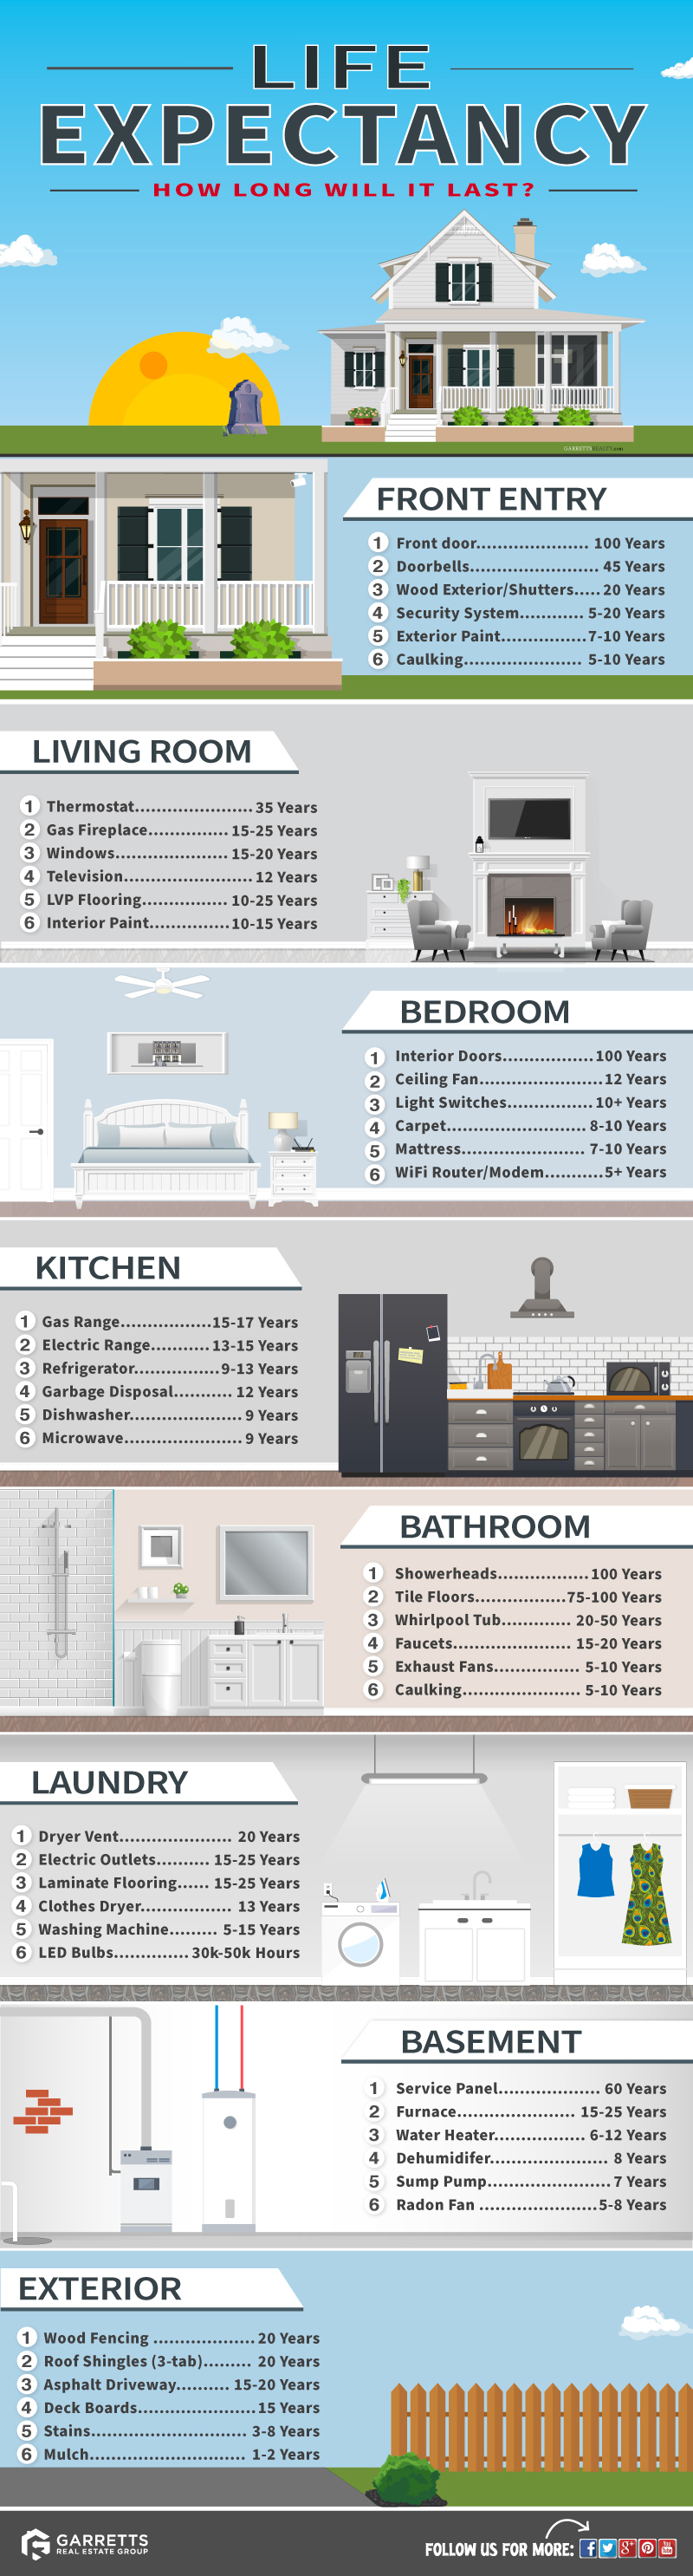 infographic of 48 different appliance and household item life spans